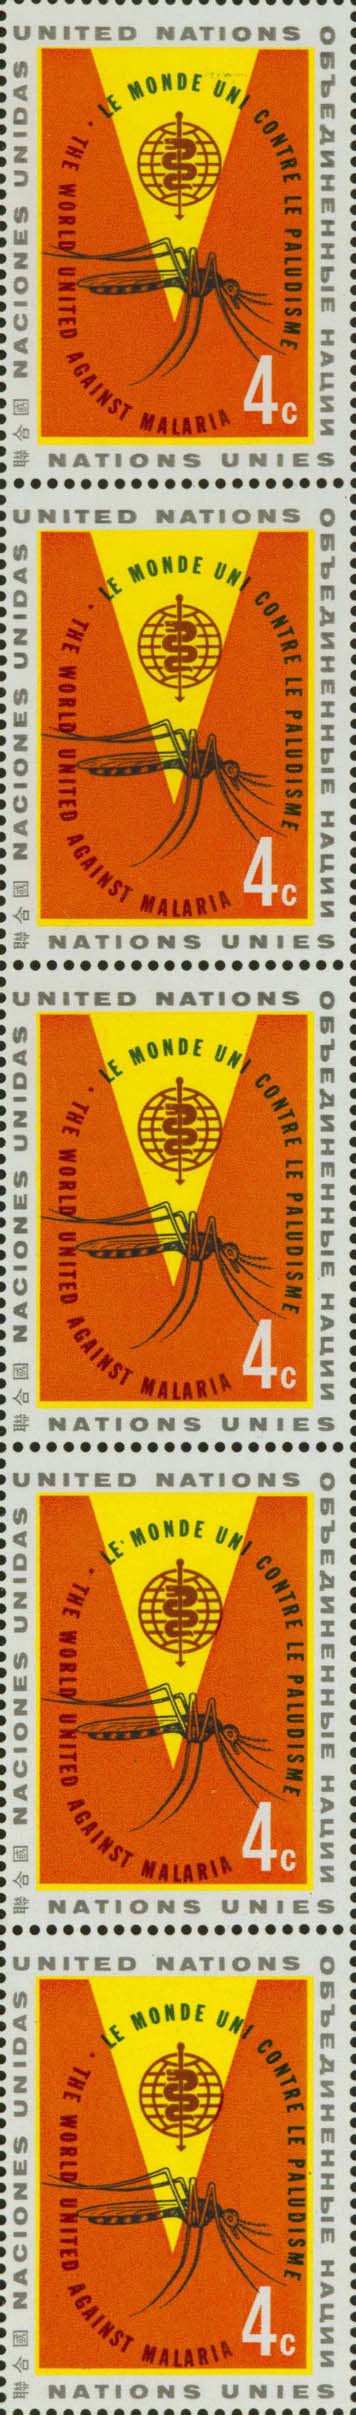 Image of the Stamp 41 Right